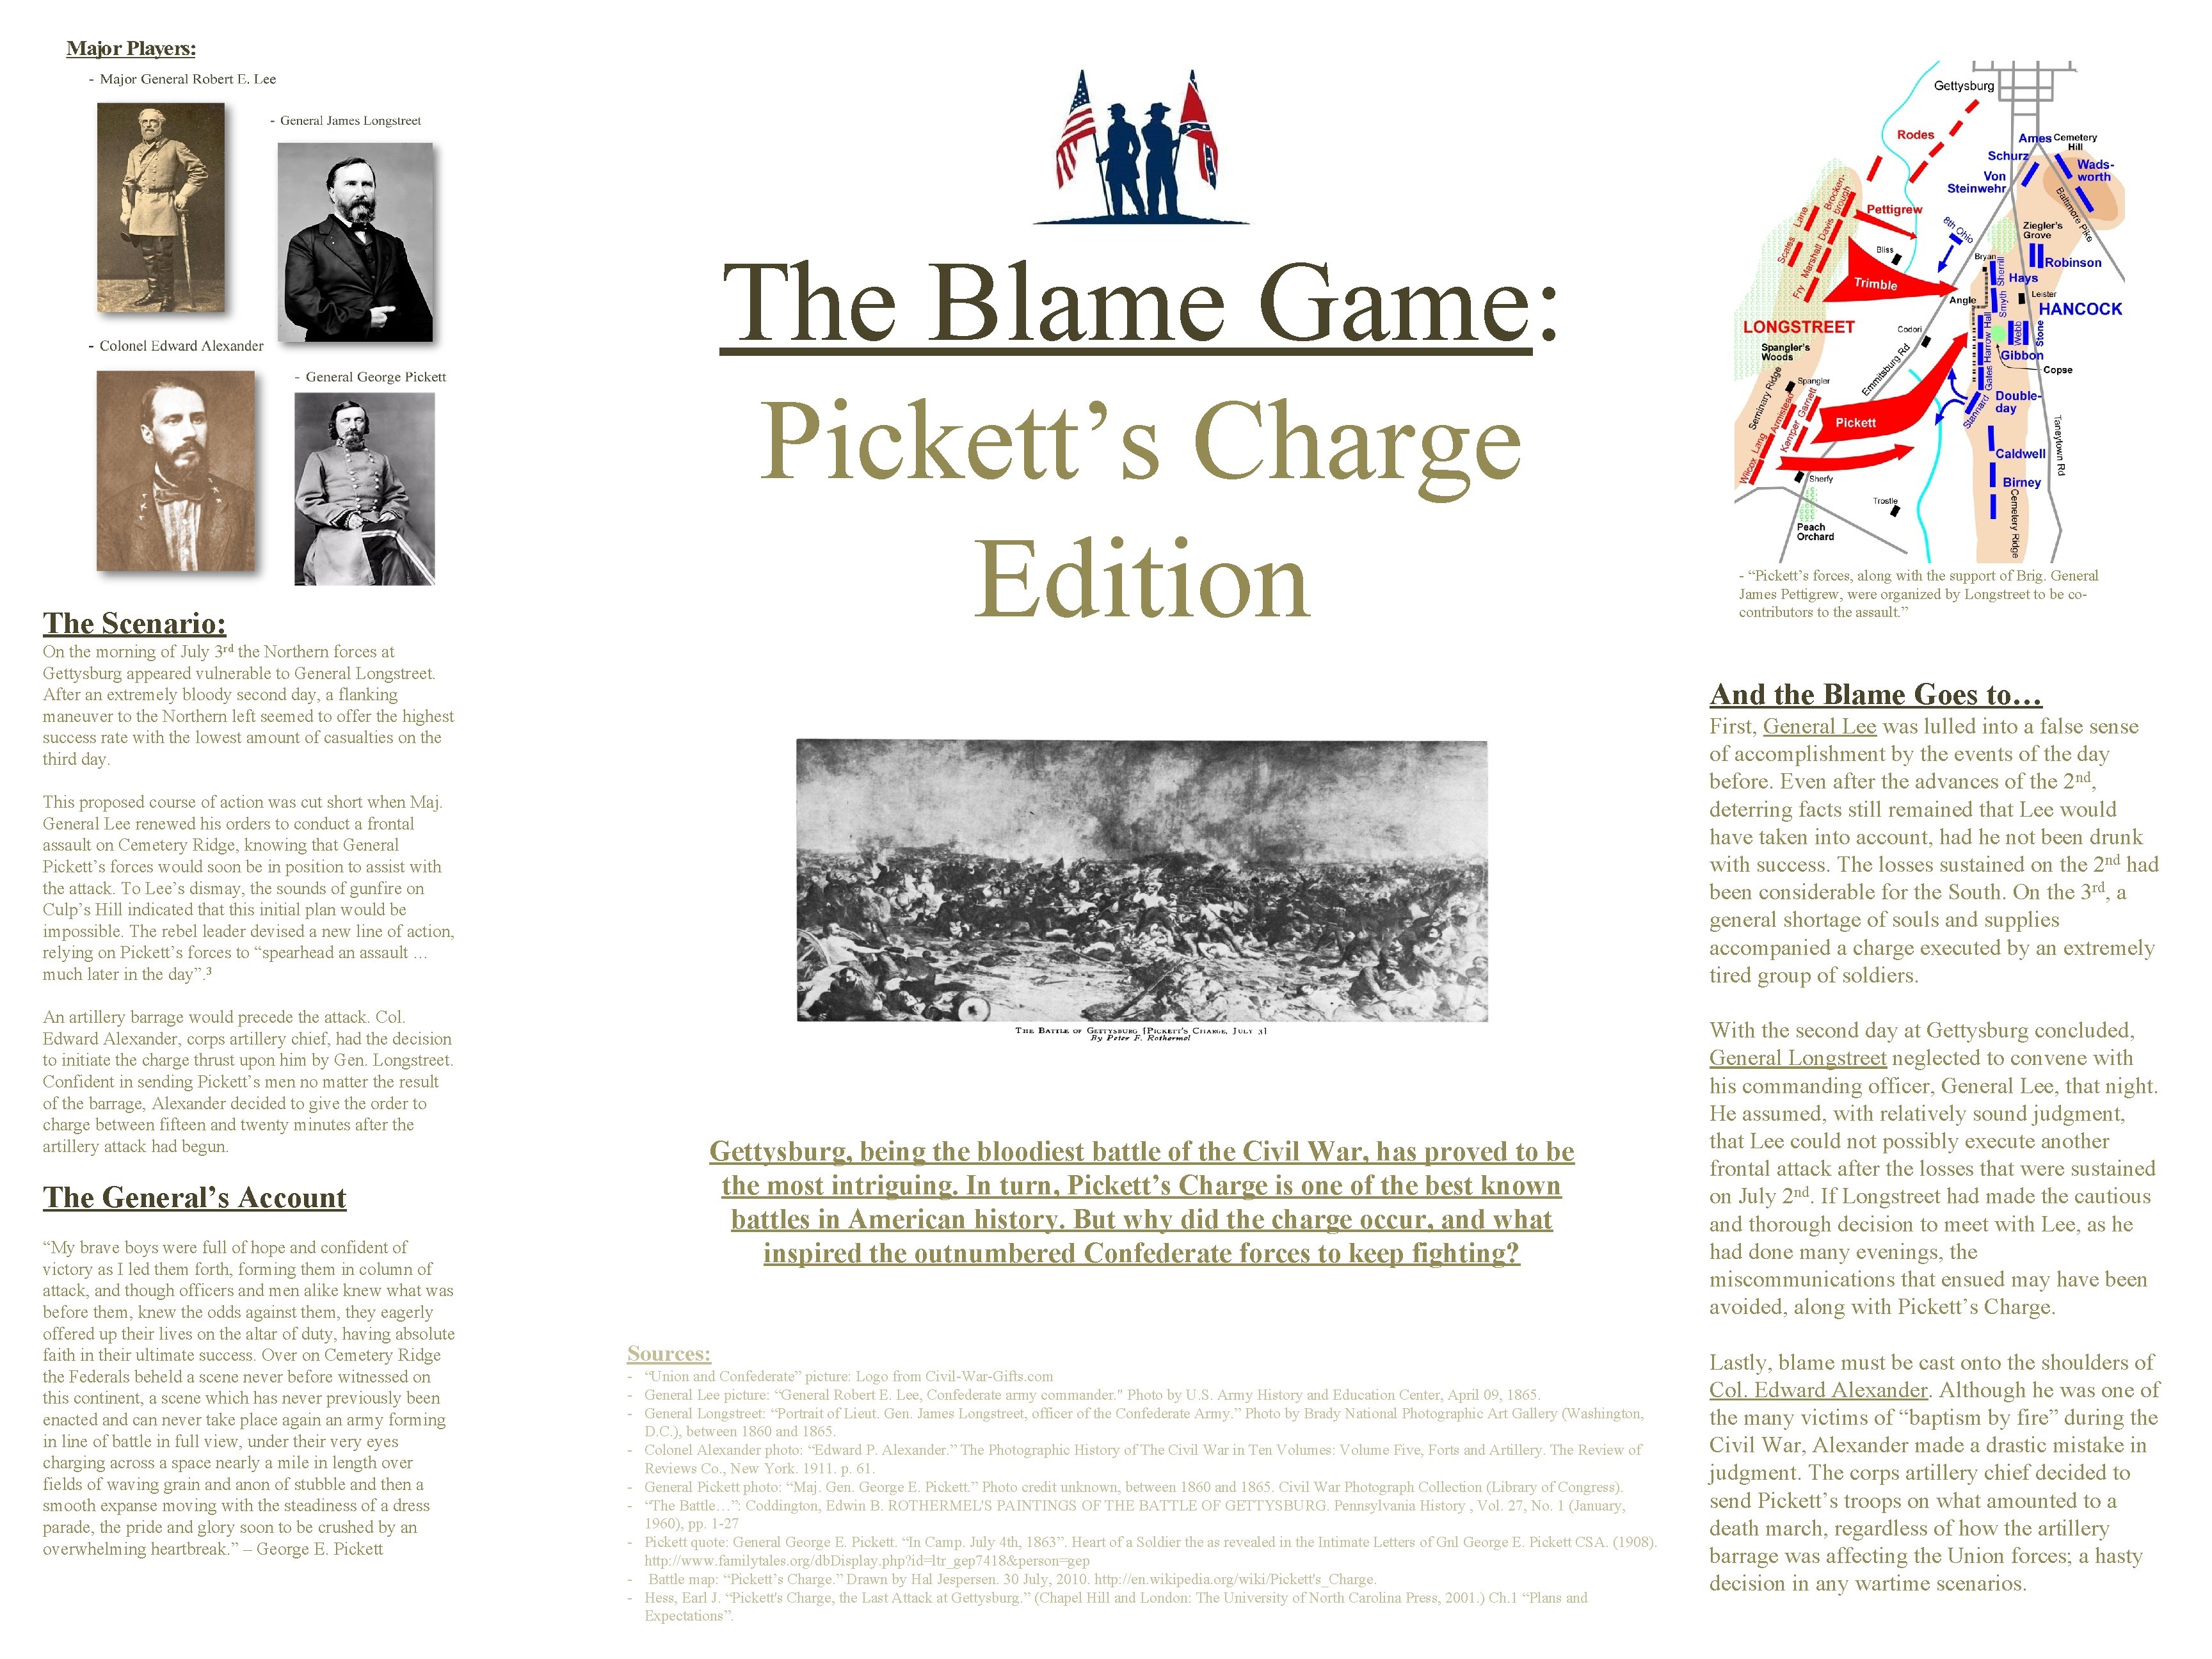 The Blame Game: Pickett’s Charge Edition The Scenario: On the morning of July 3